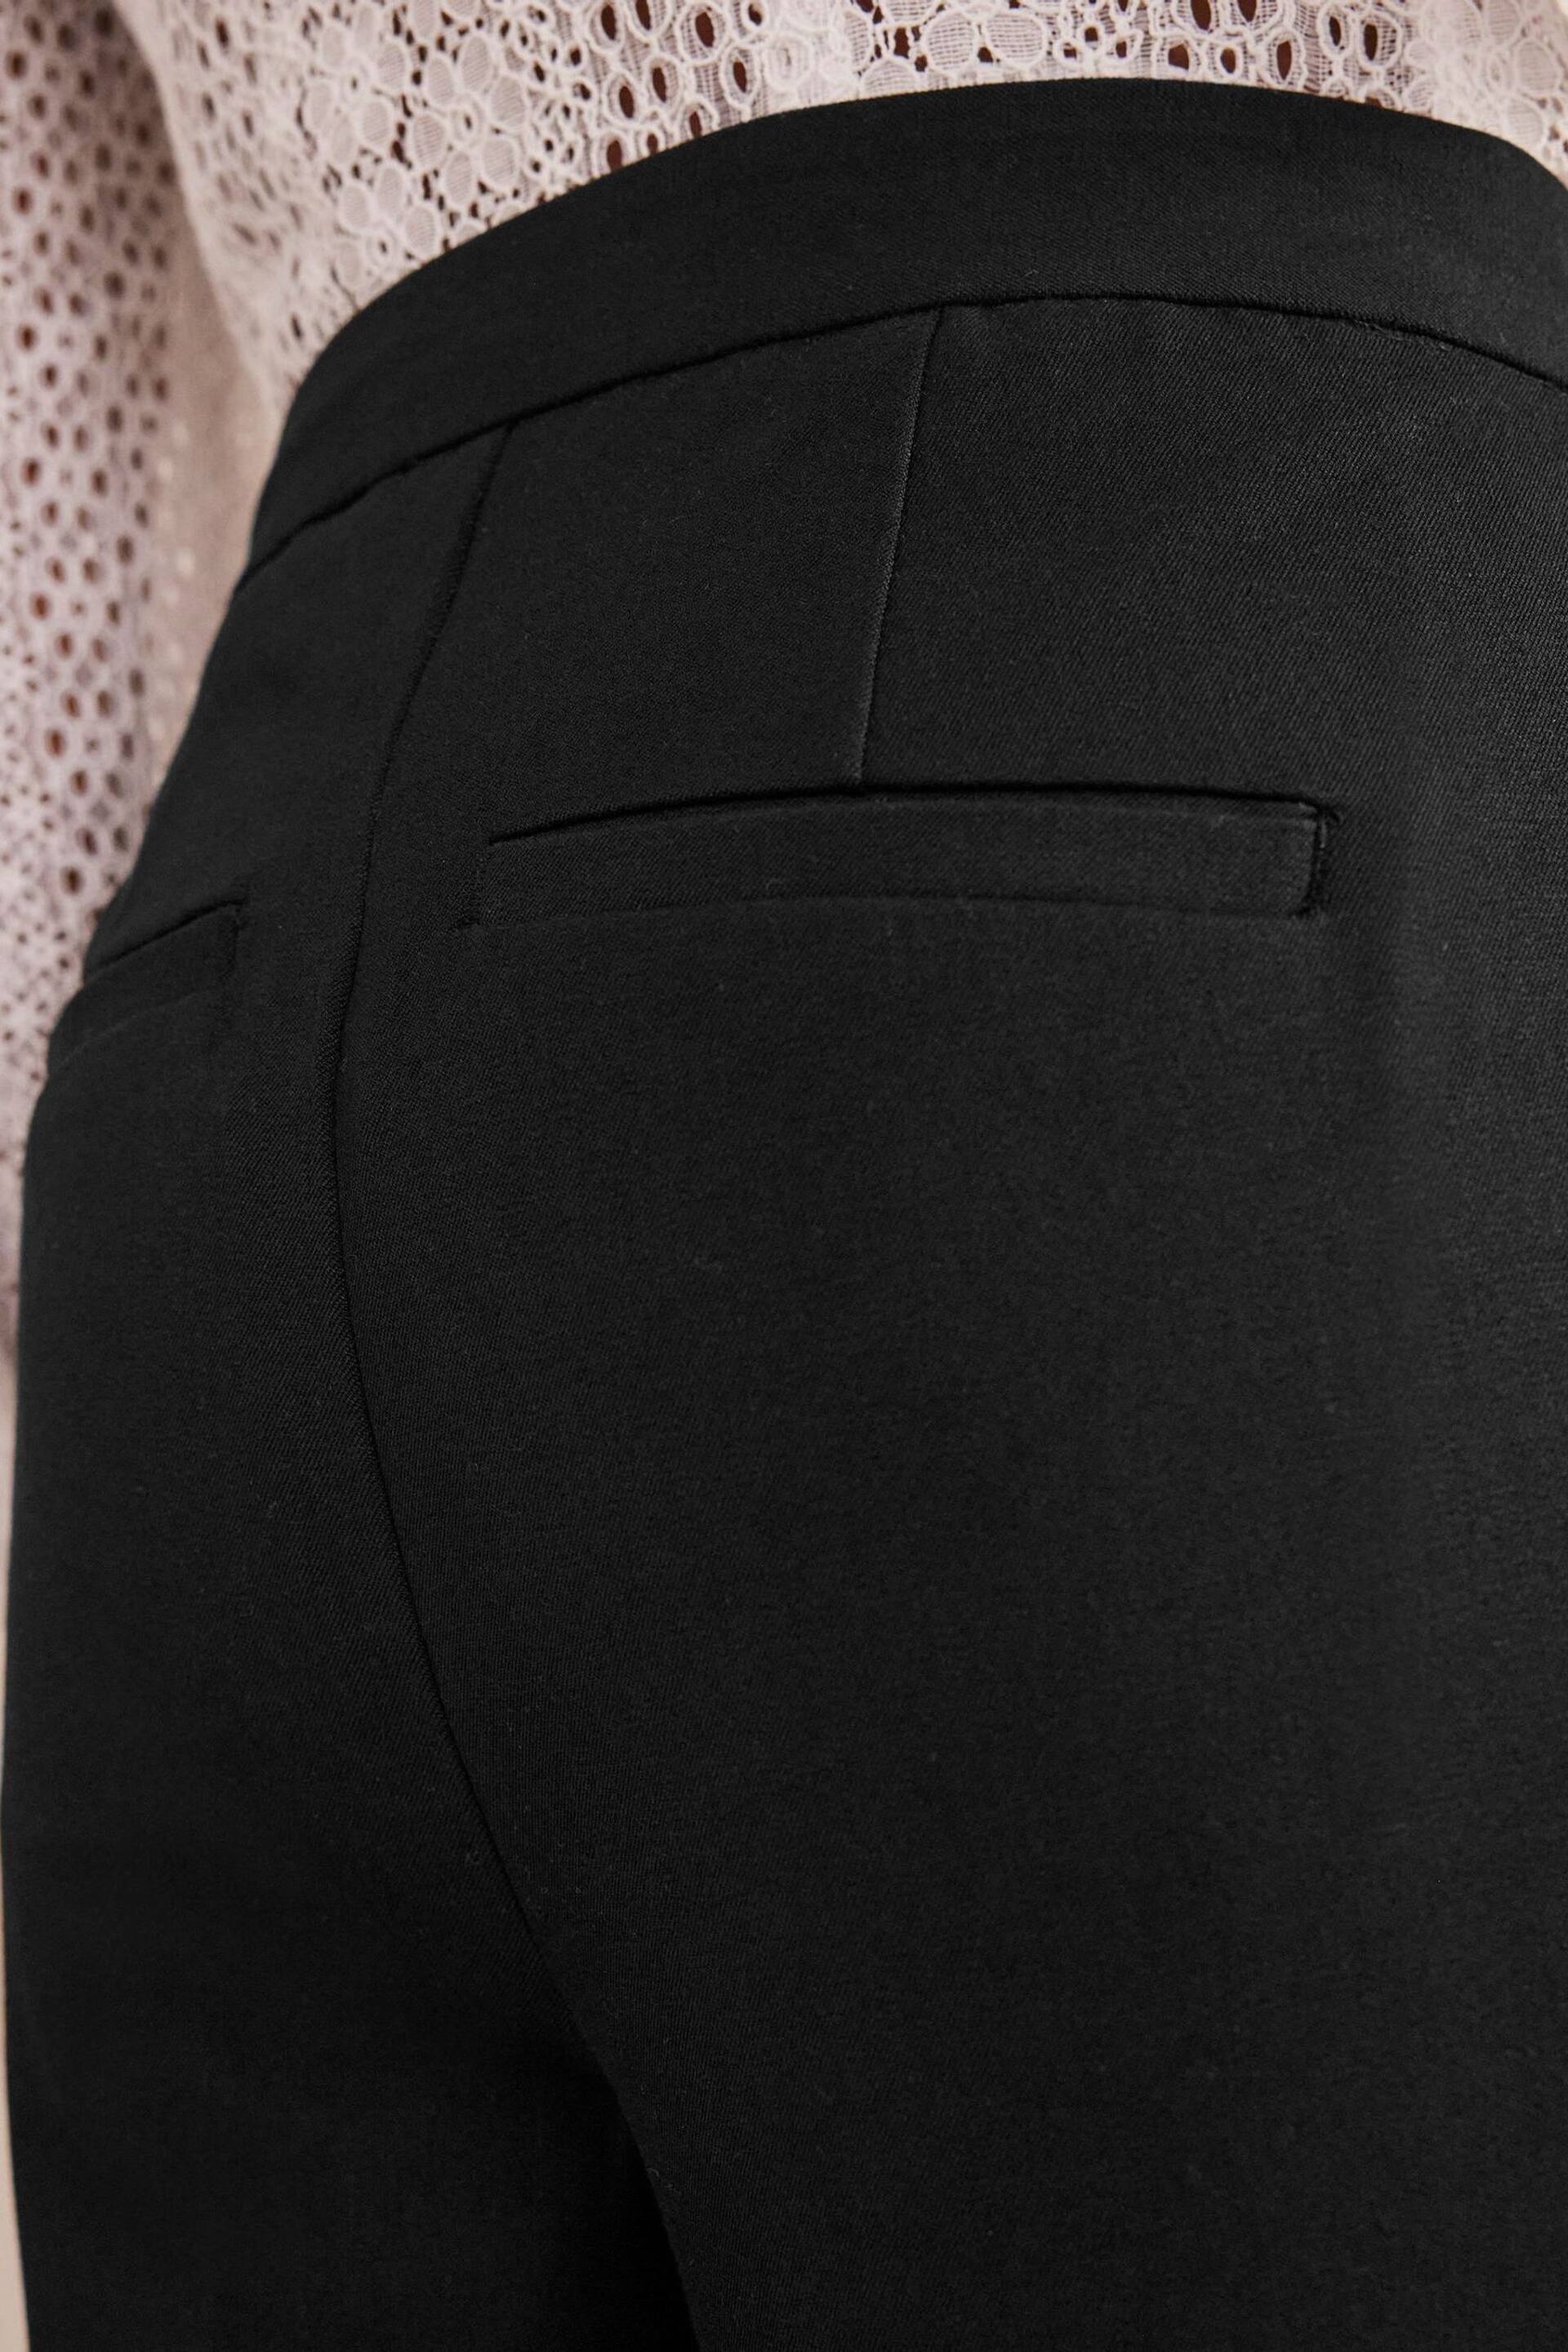 Boden Black Bi-Stretch Tapered Trousers - Image 5 of 6